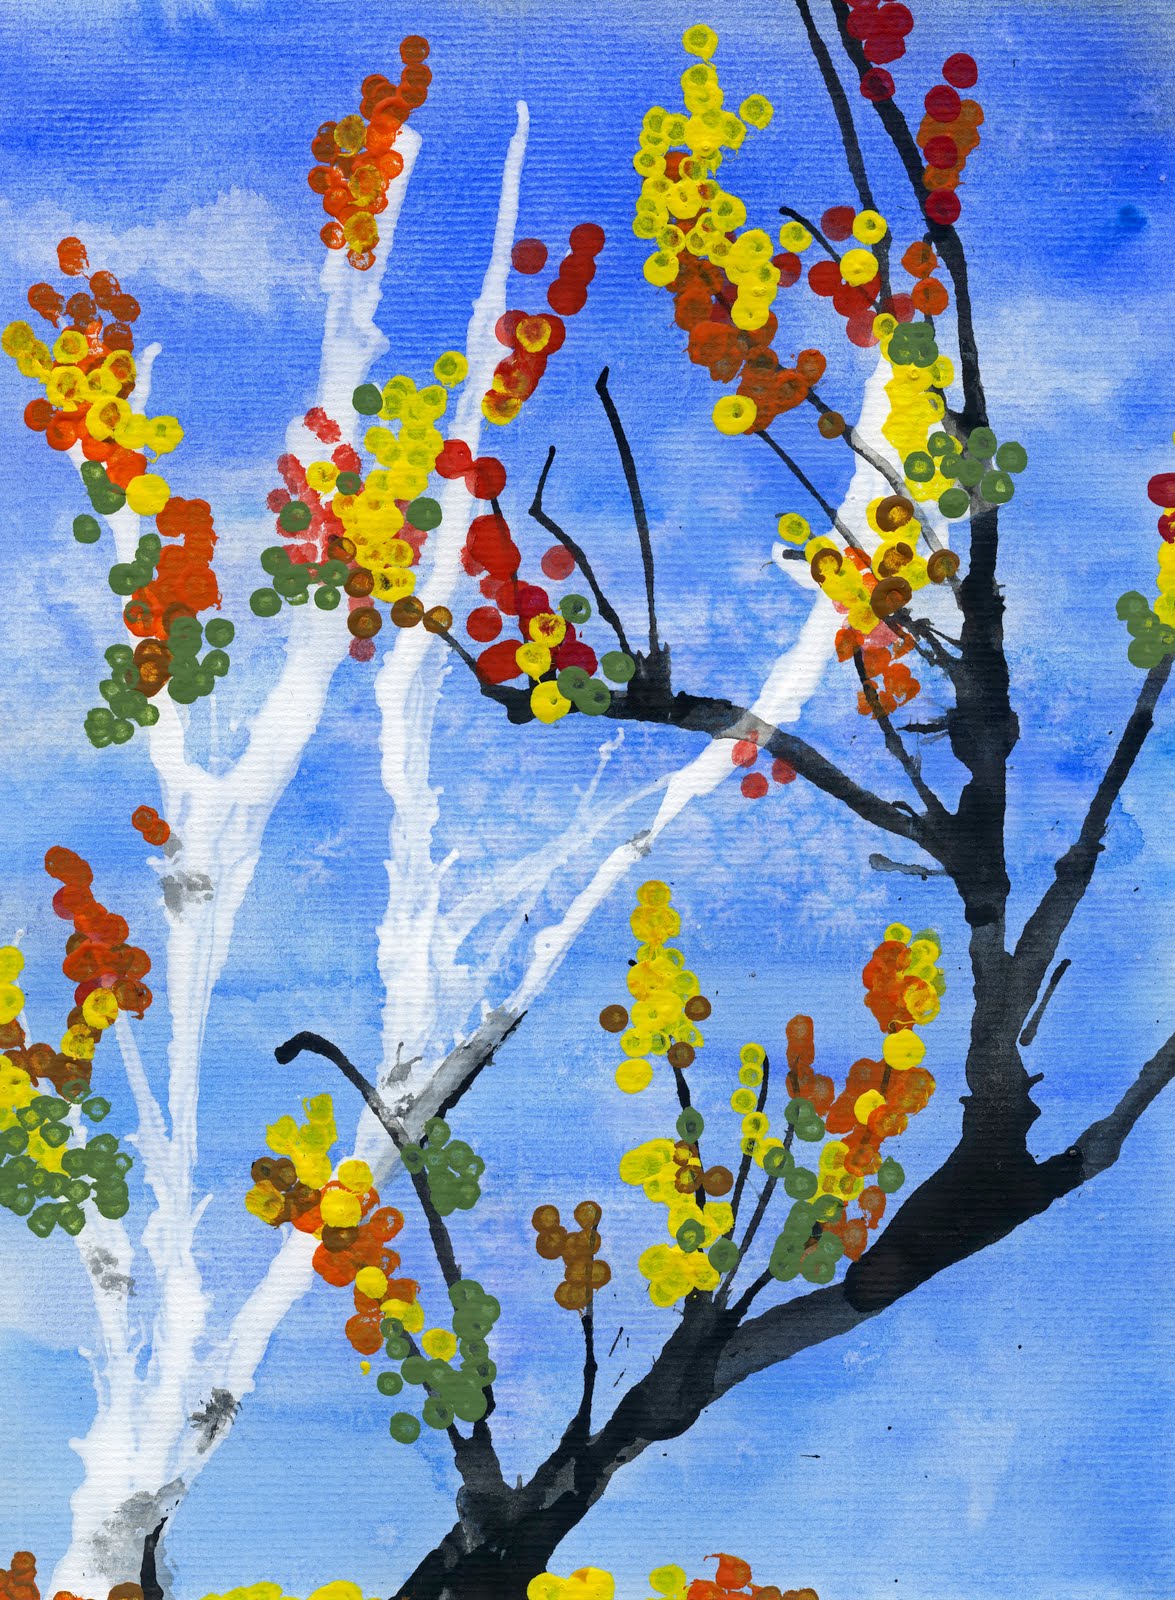 Online Class: Fall Tree with FolkArt Acrylics